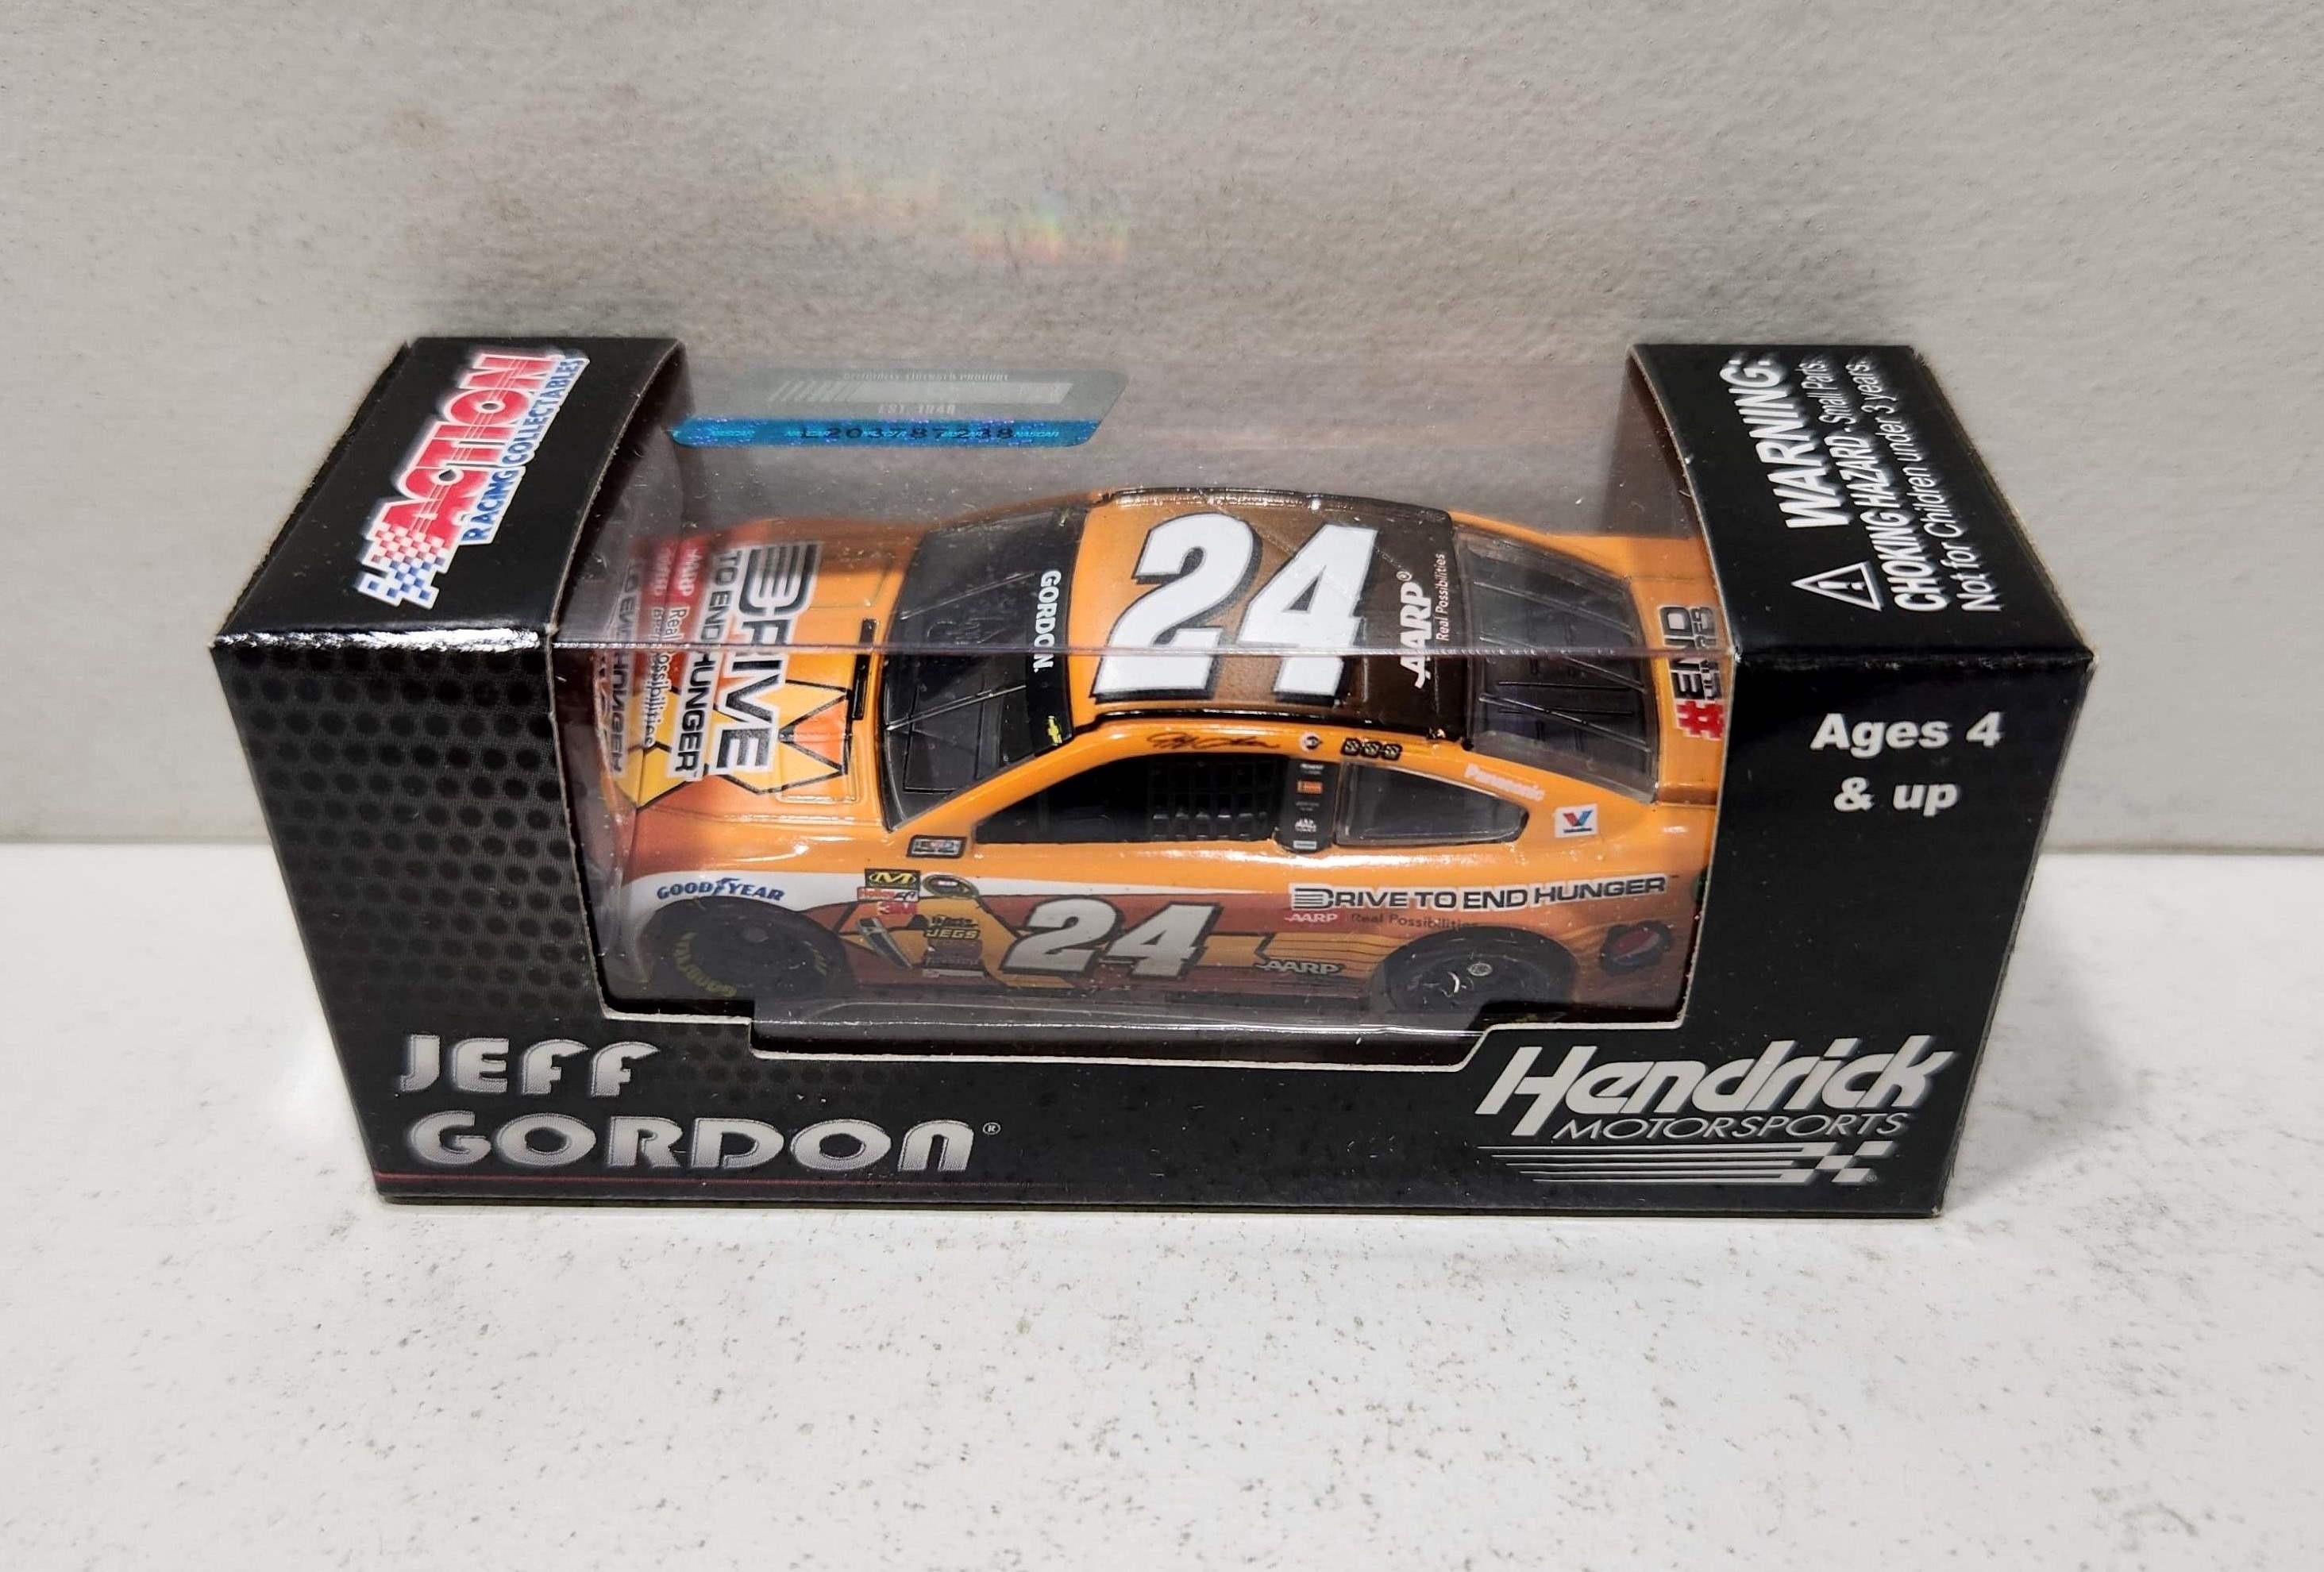 2014 Jeff Gordon 1/64th AARP/DTEH "Hunger Awareness Month" Pitstop Series Chevrolet SS